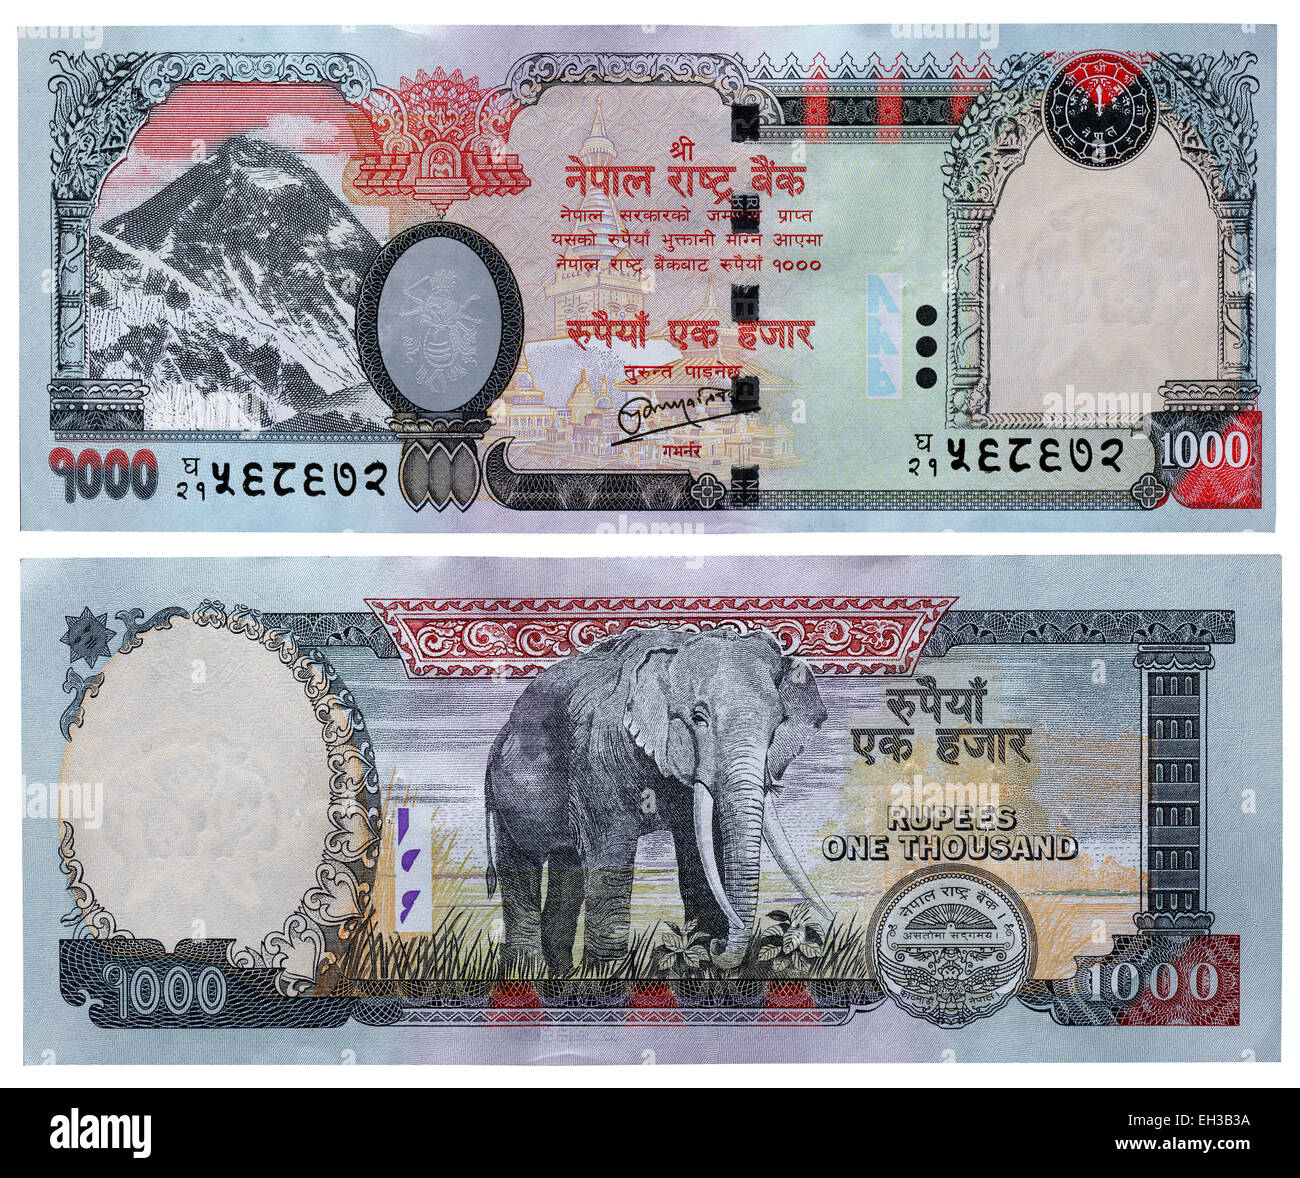 1000 rupees banknote, Mount Everest and elephant, Nepal, 2008 Stock Photo